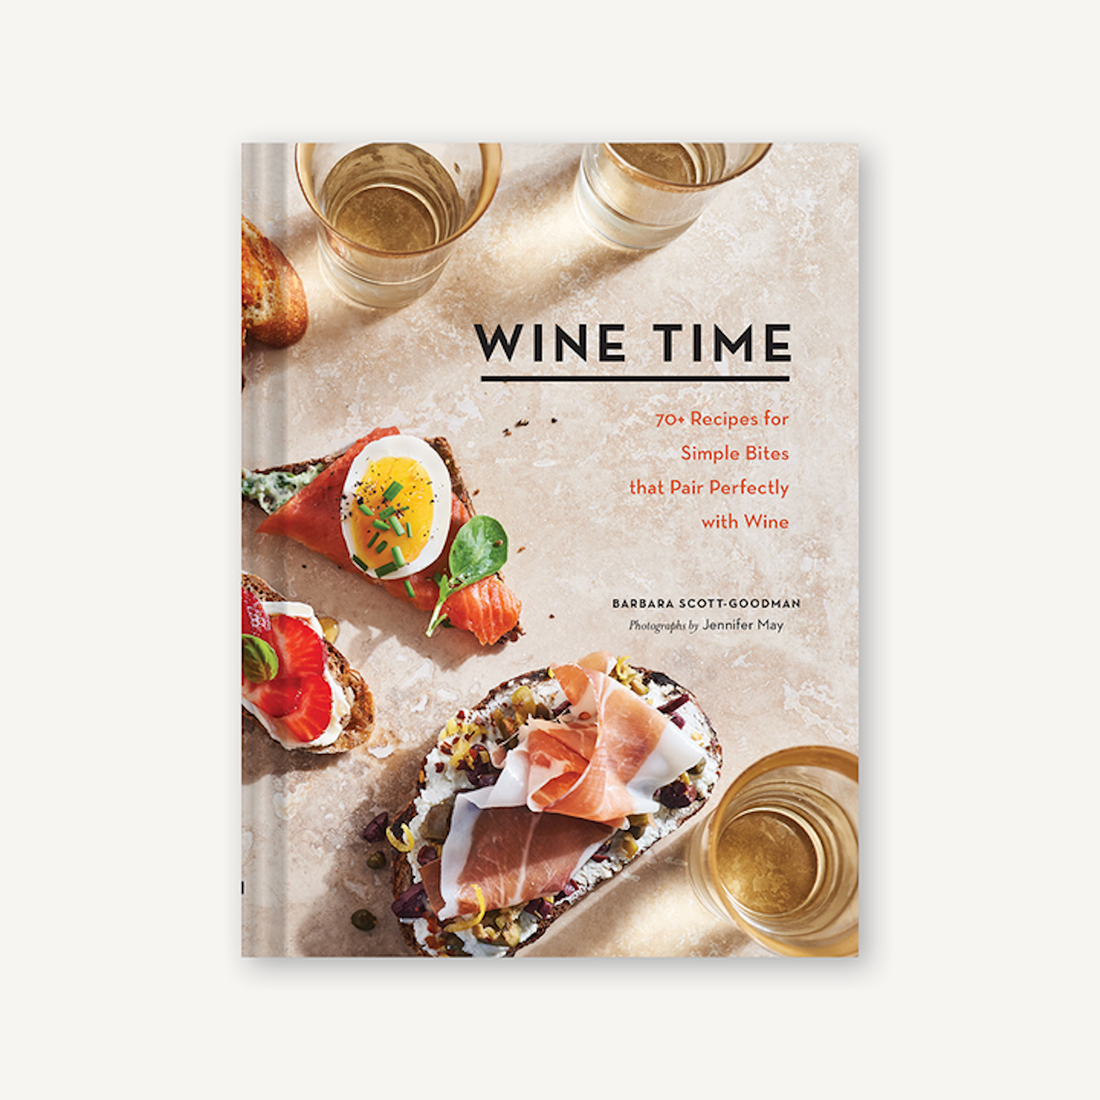 A cookbook titled &quot;Wine Time&quot; by Chronicle Books with recipes for simple bites that pair well with wine pairings, displayed alongside two stemless wine glasses and appetizers.